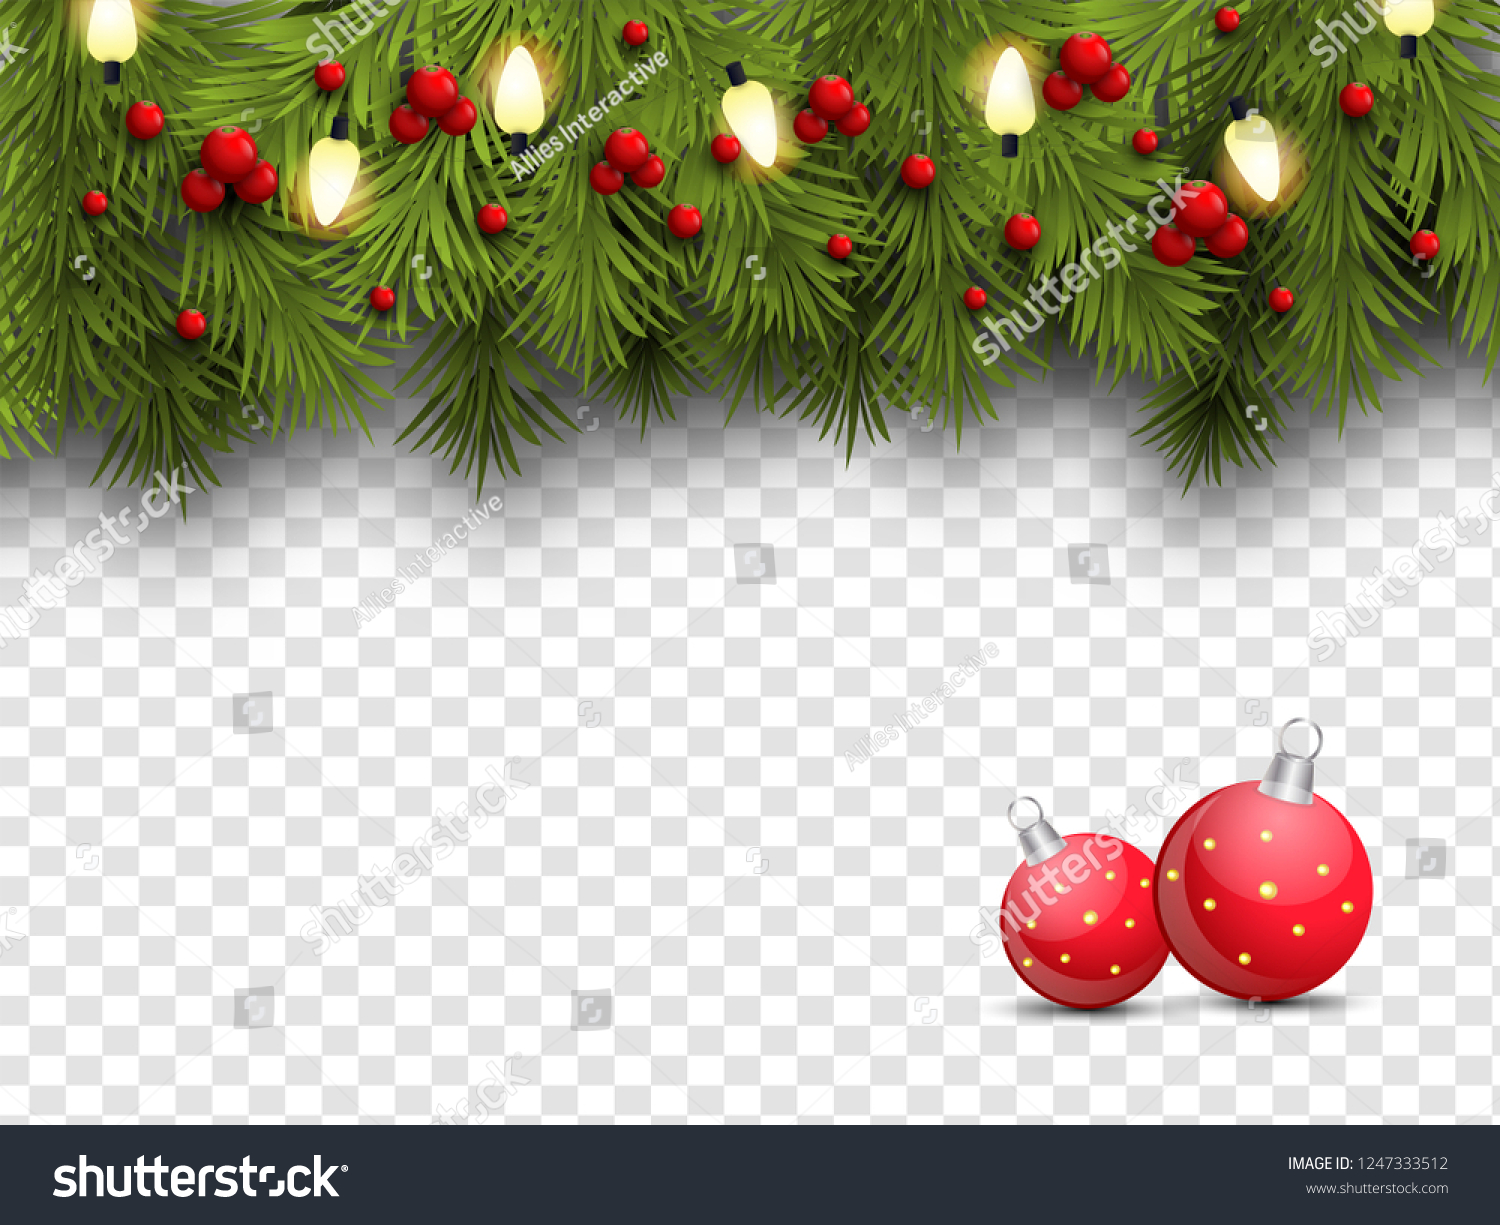 2,036 Christmas banner png Images, Stock Photos & Vectors | Shutterstock